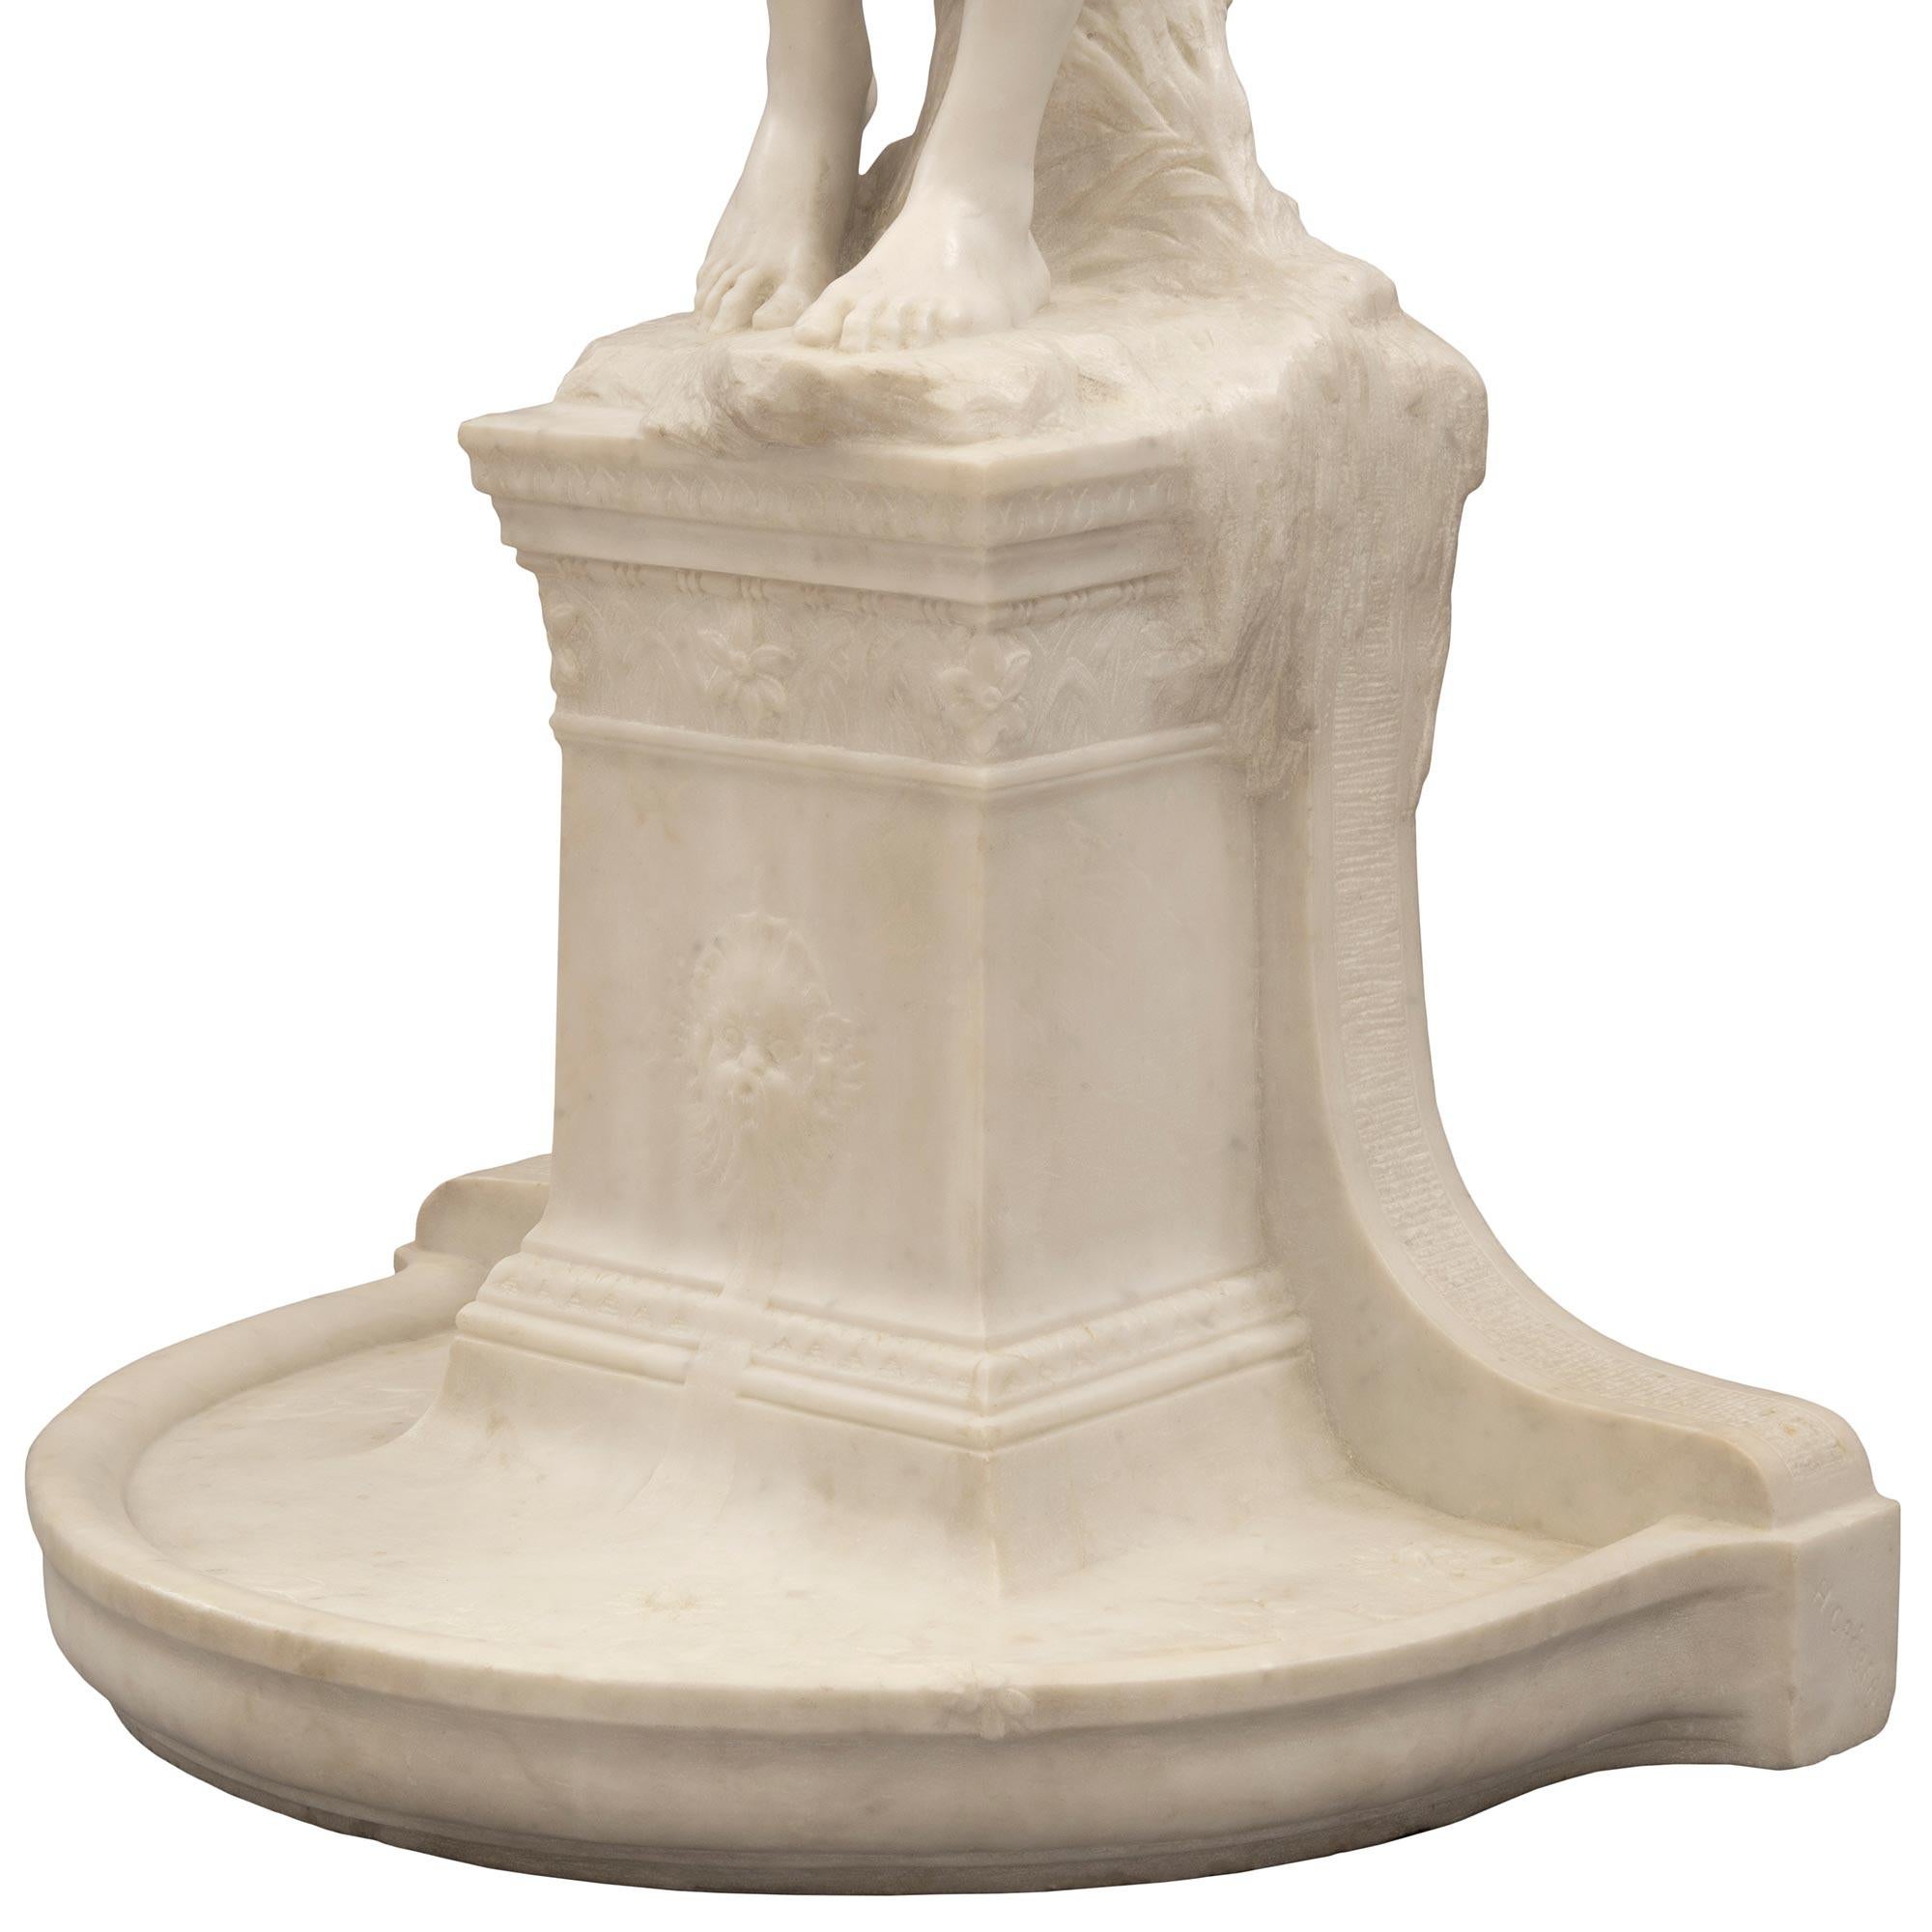 French 19th Century Solid White Carrara Marble Statue/Basin For Sale 5